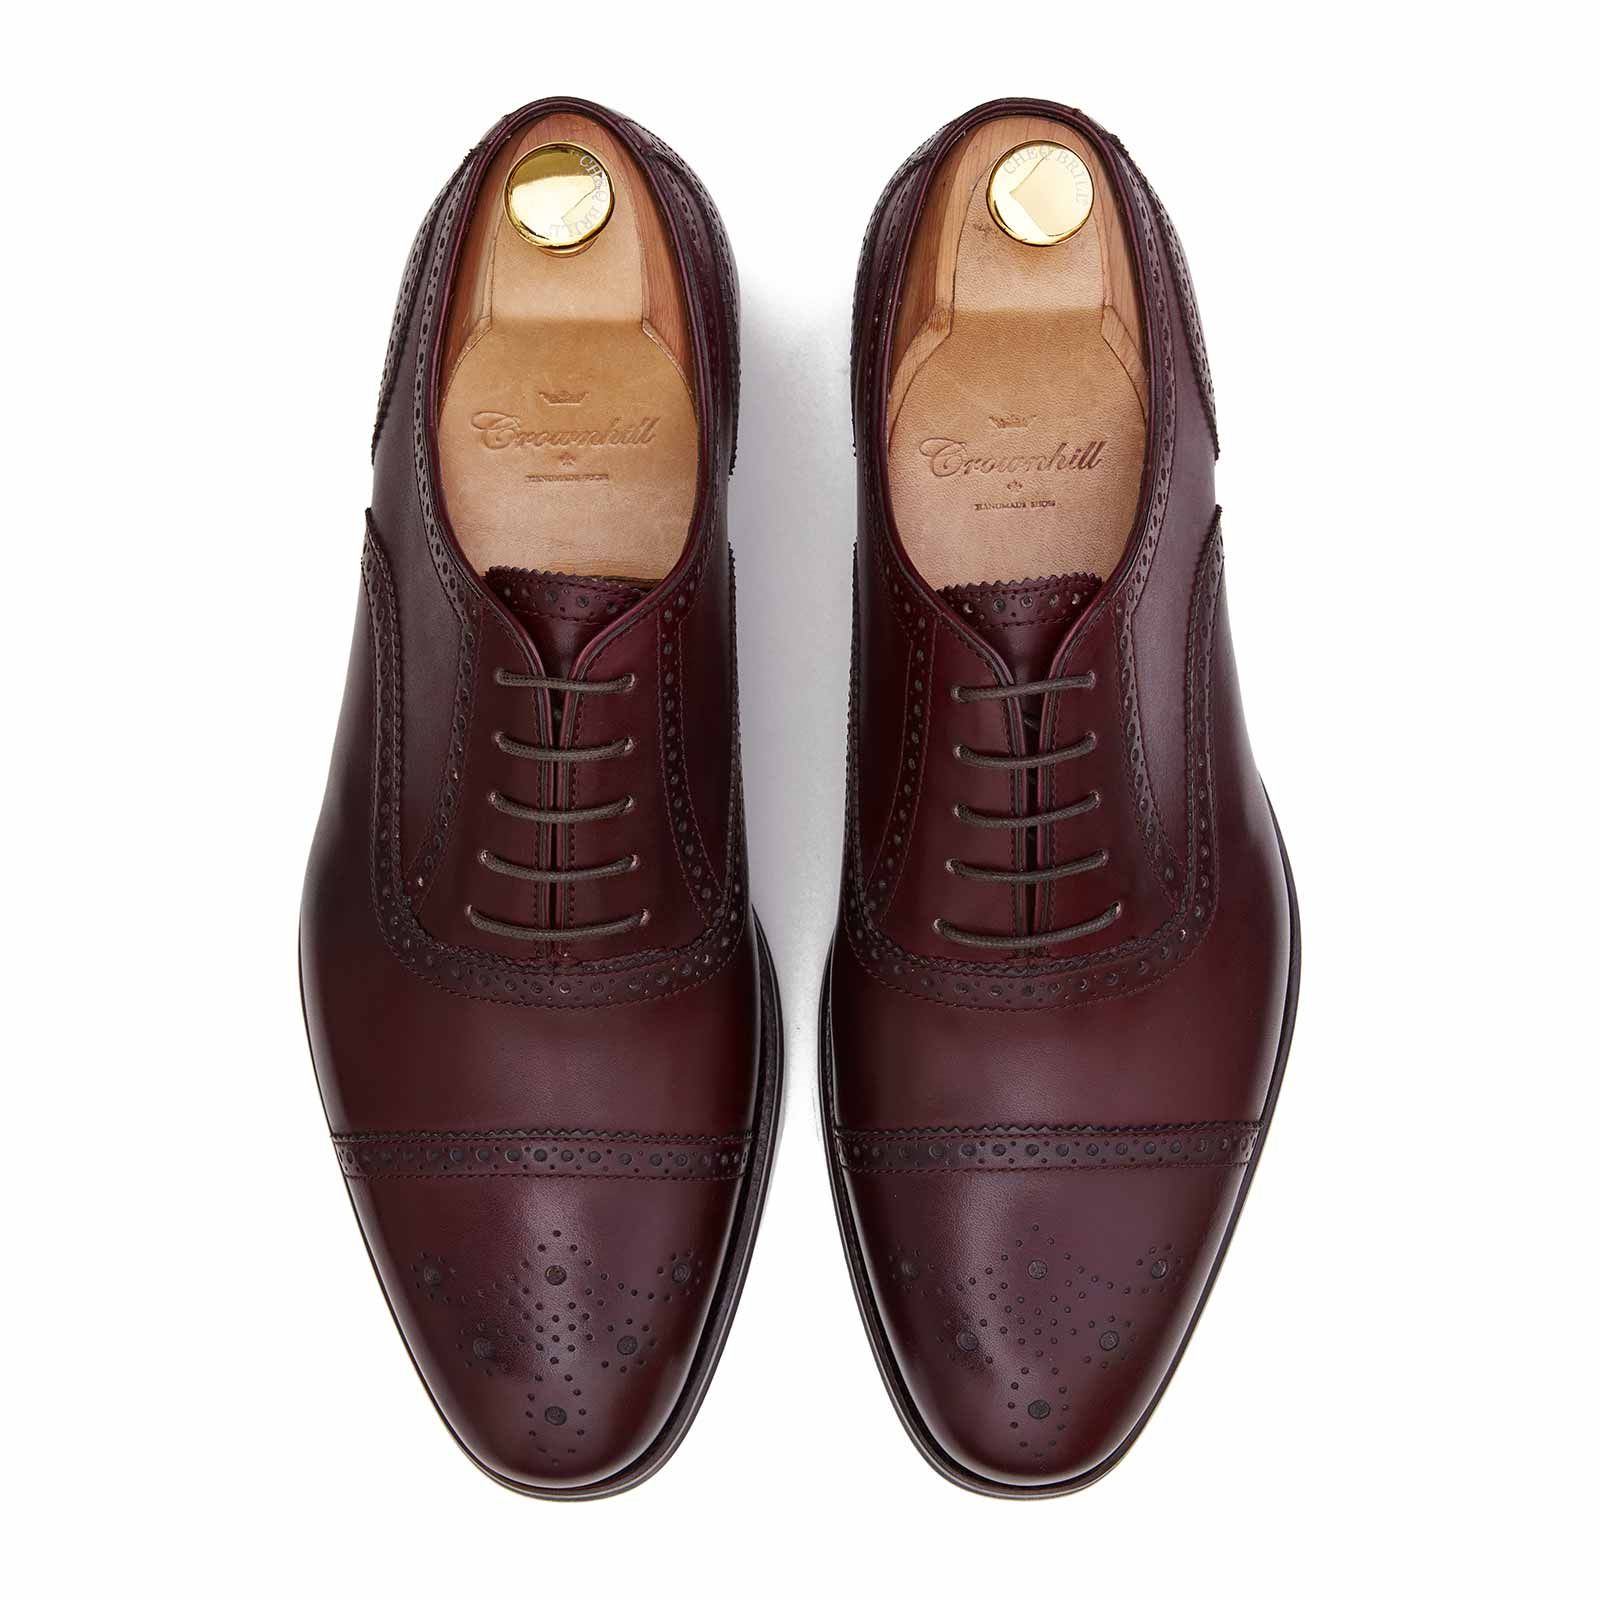 sympathy Just do nothing The Vichy: Burgundy full brogue oxford rubber sole | Crownhill Shoes